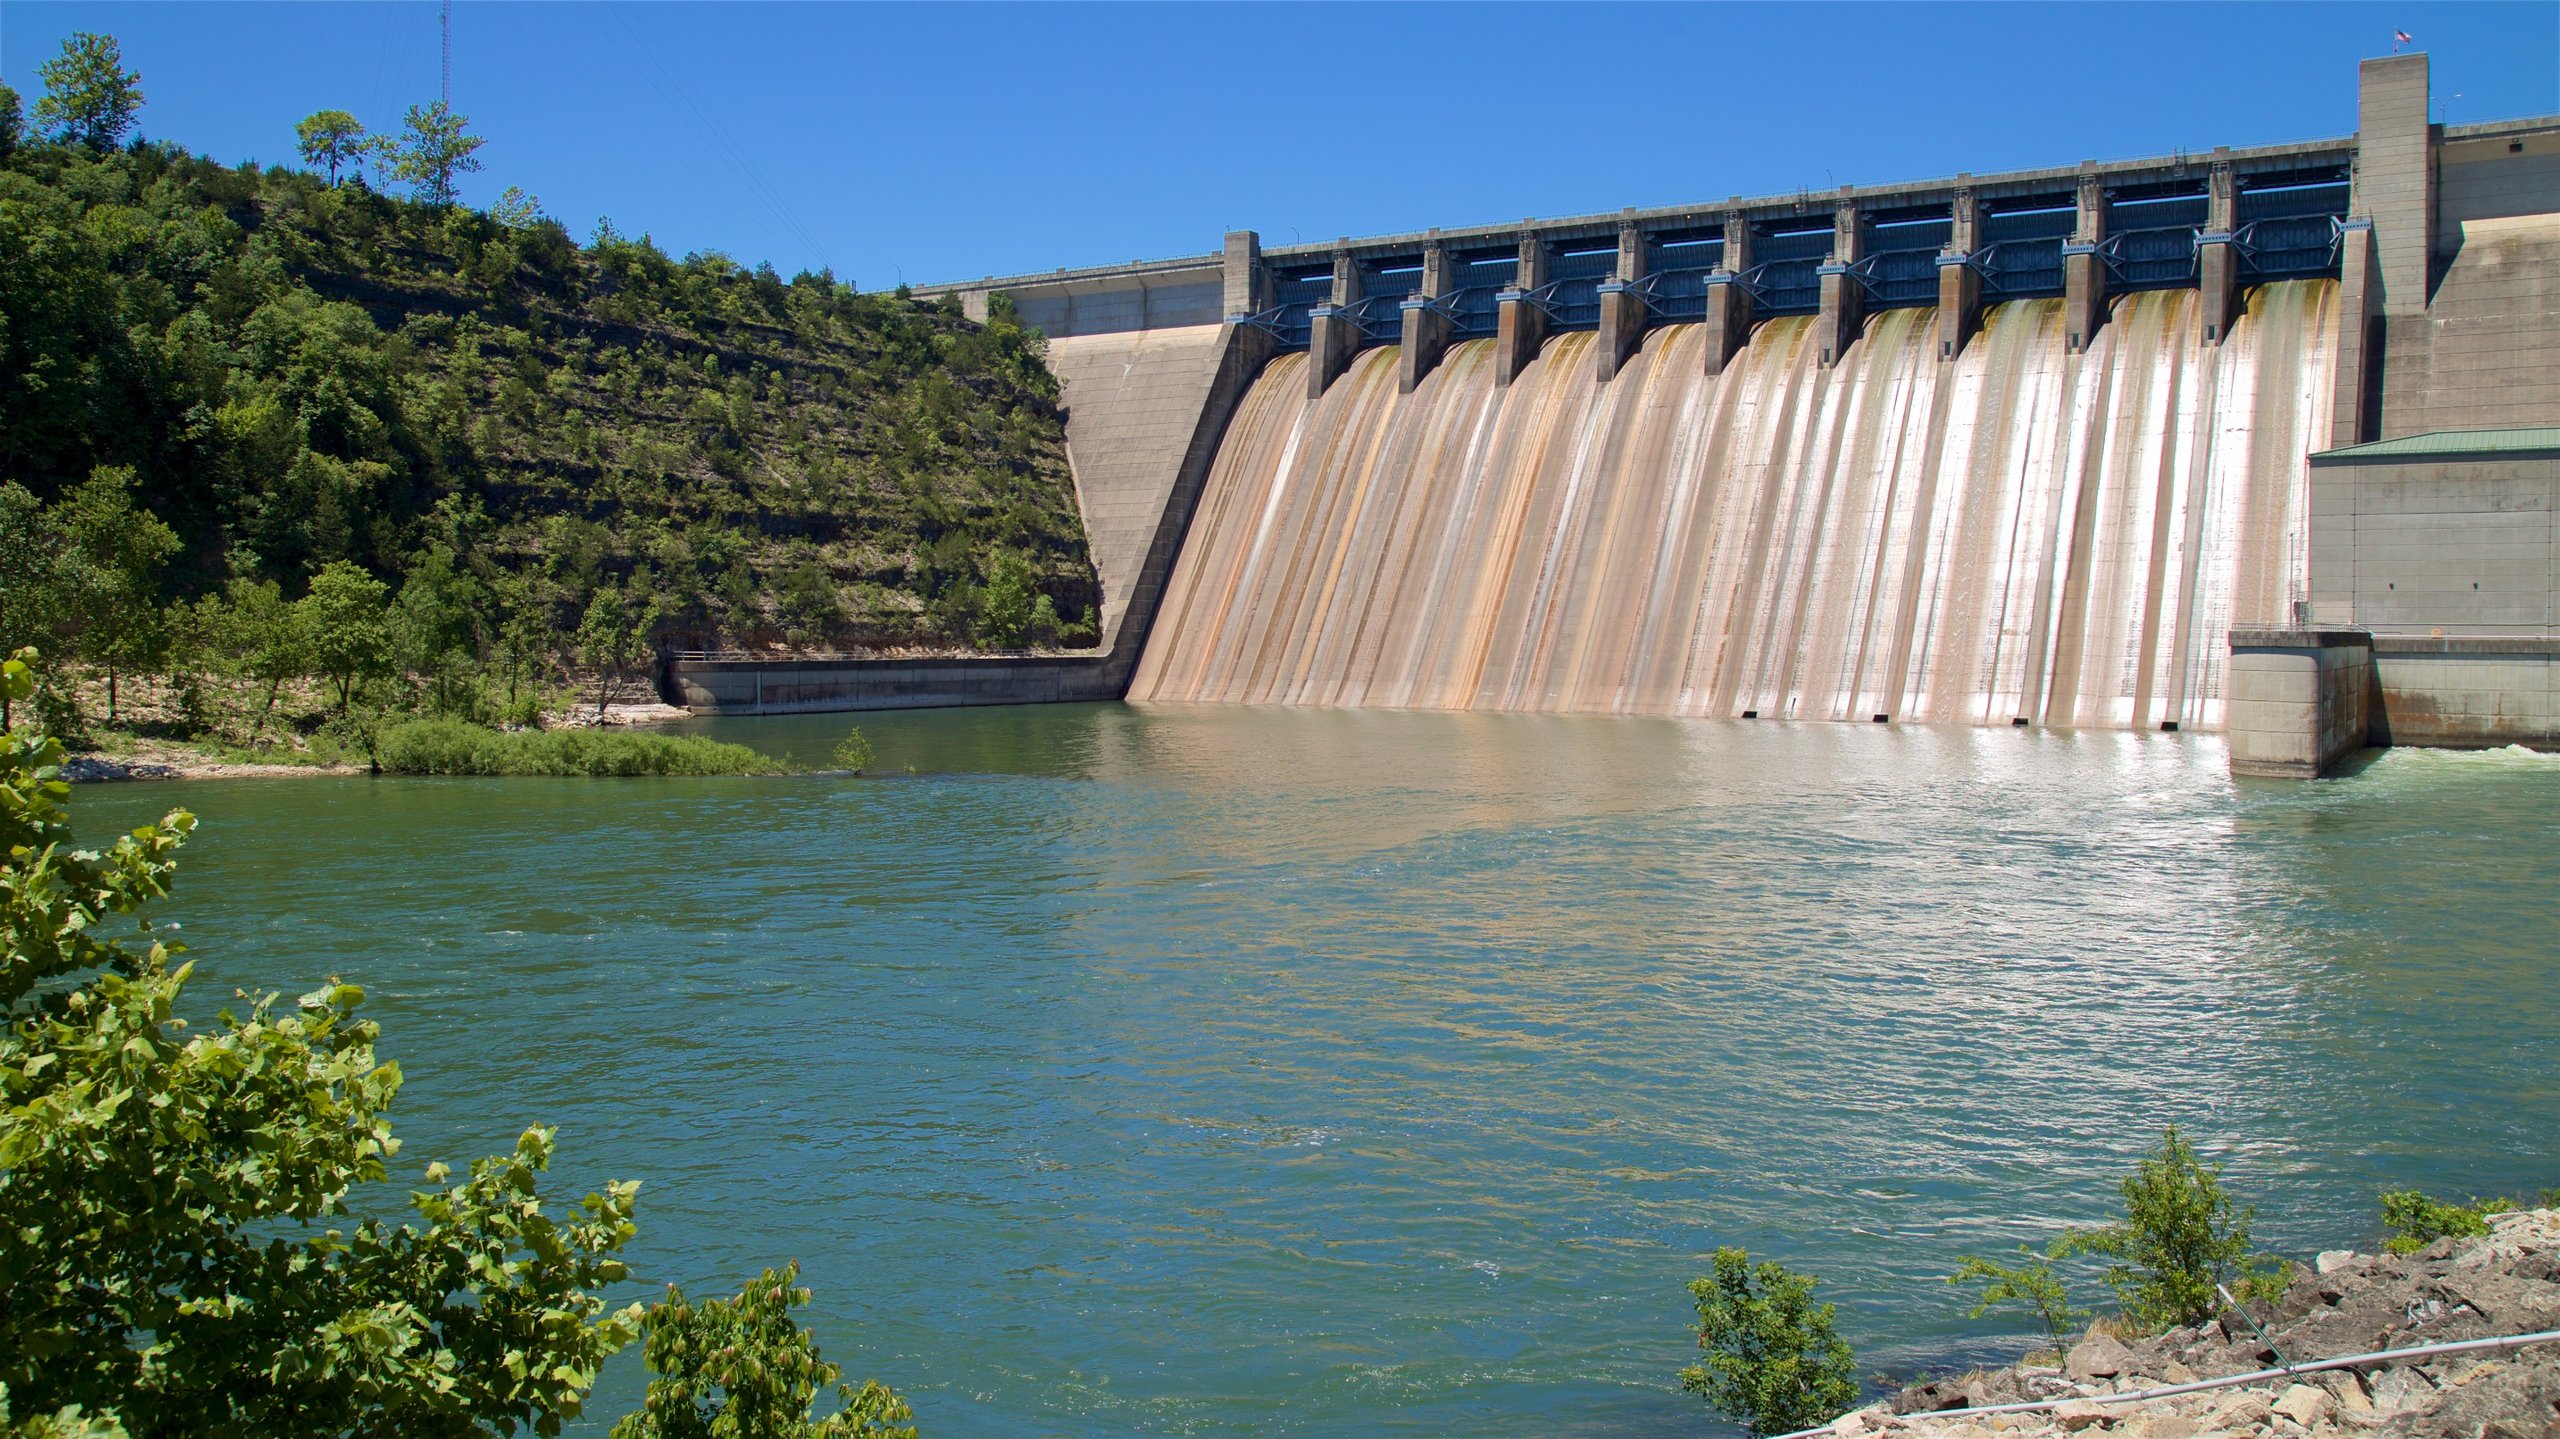 Scheduled Lane Closure over Table Rock Dam